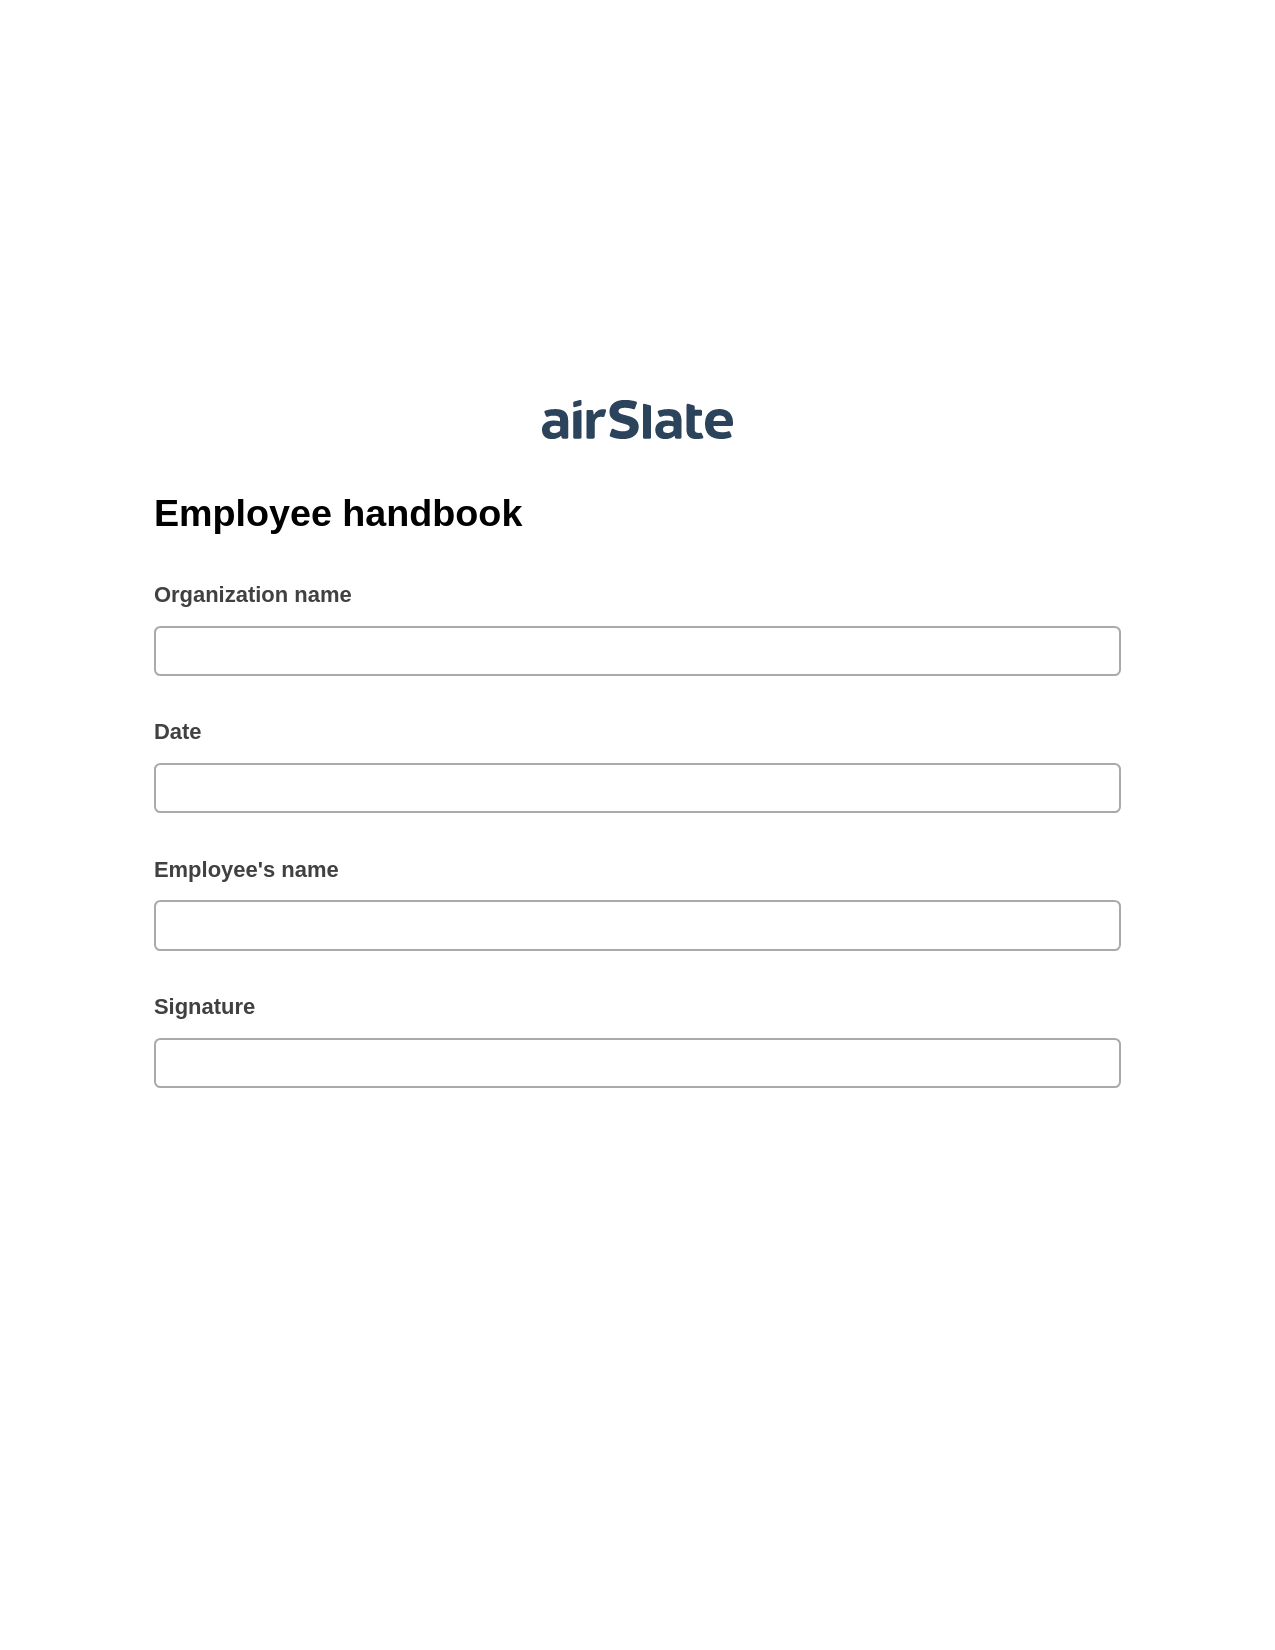 Employee handbook Pre-fill from NetSuite Records Bot, Update NetSuite Records Bot, Email Notification Postfinish Bot